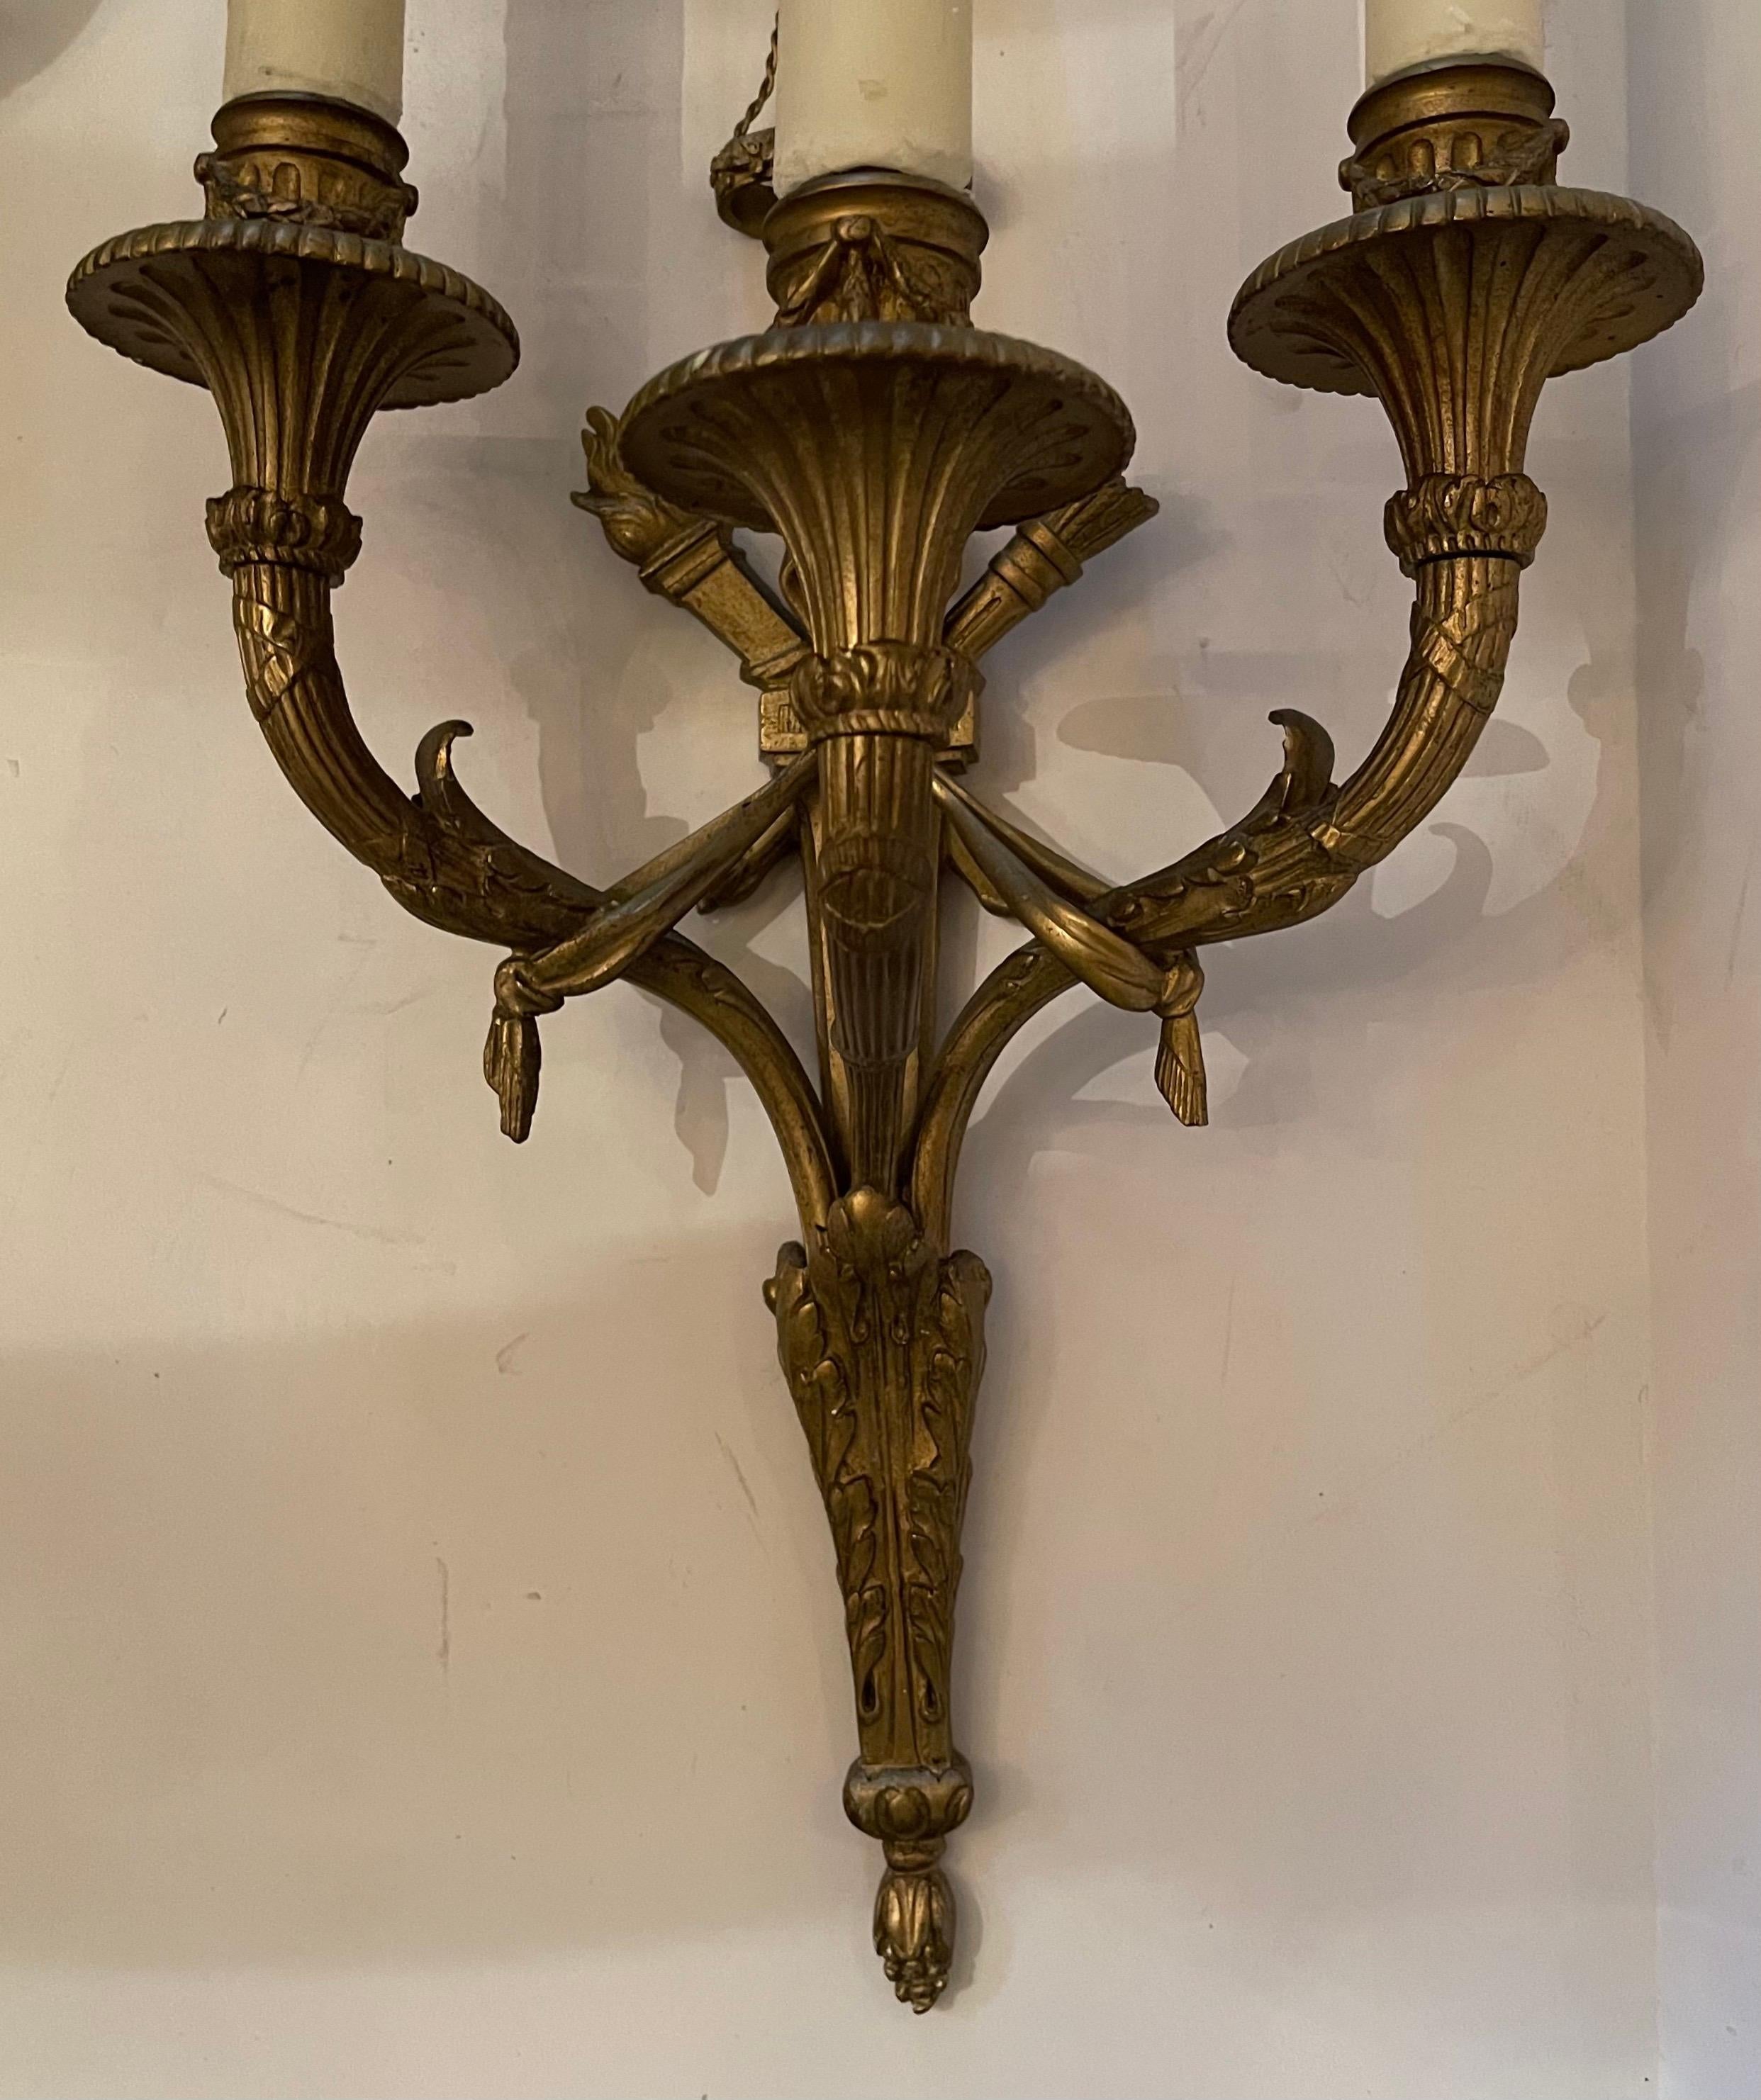 Wonderful Pair French Gilt Doré Bronze Bow Cross Torchiere Swag Caldwell Sconces In Good Condition For Sale In Roslyn, NY